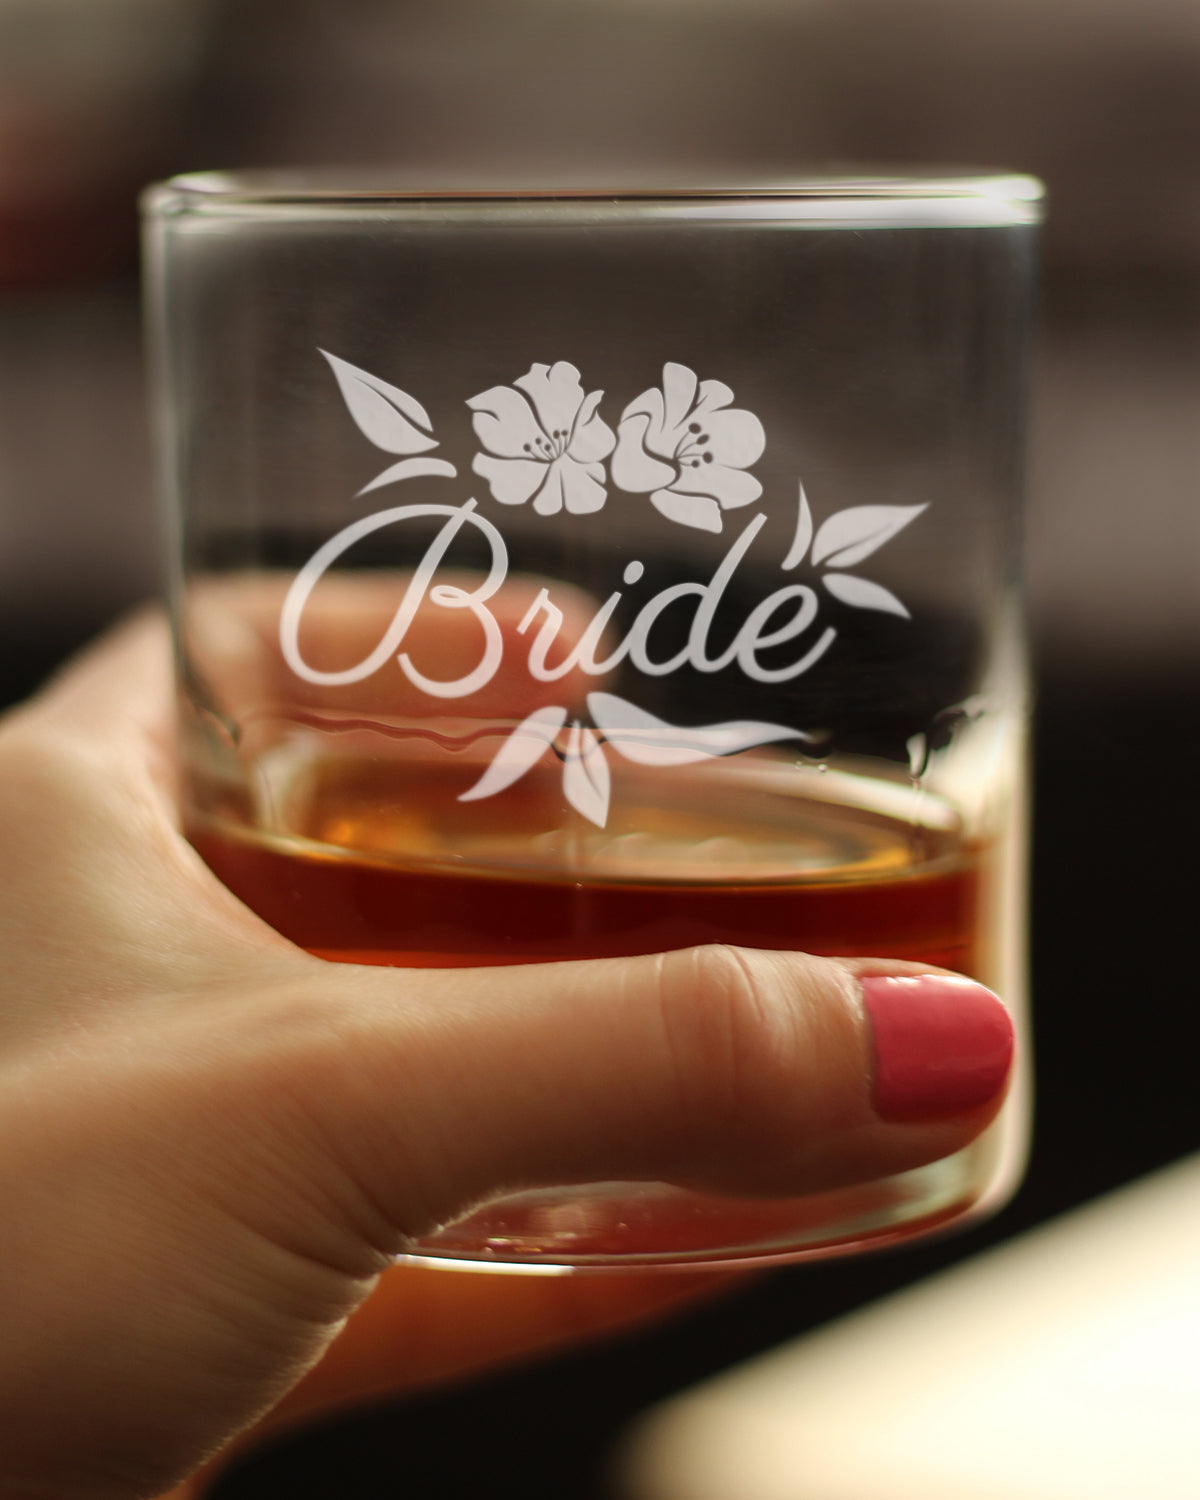 Bride Old Fashioned Rocks Glass - Unique Wedding Gift for Bride - Cute Engraved Wedding Cup Gift